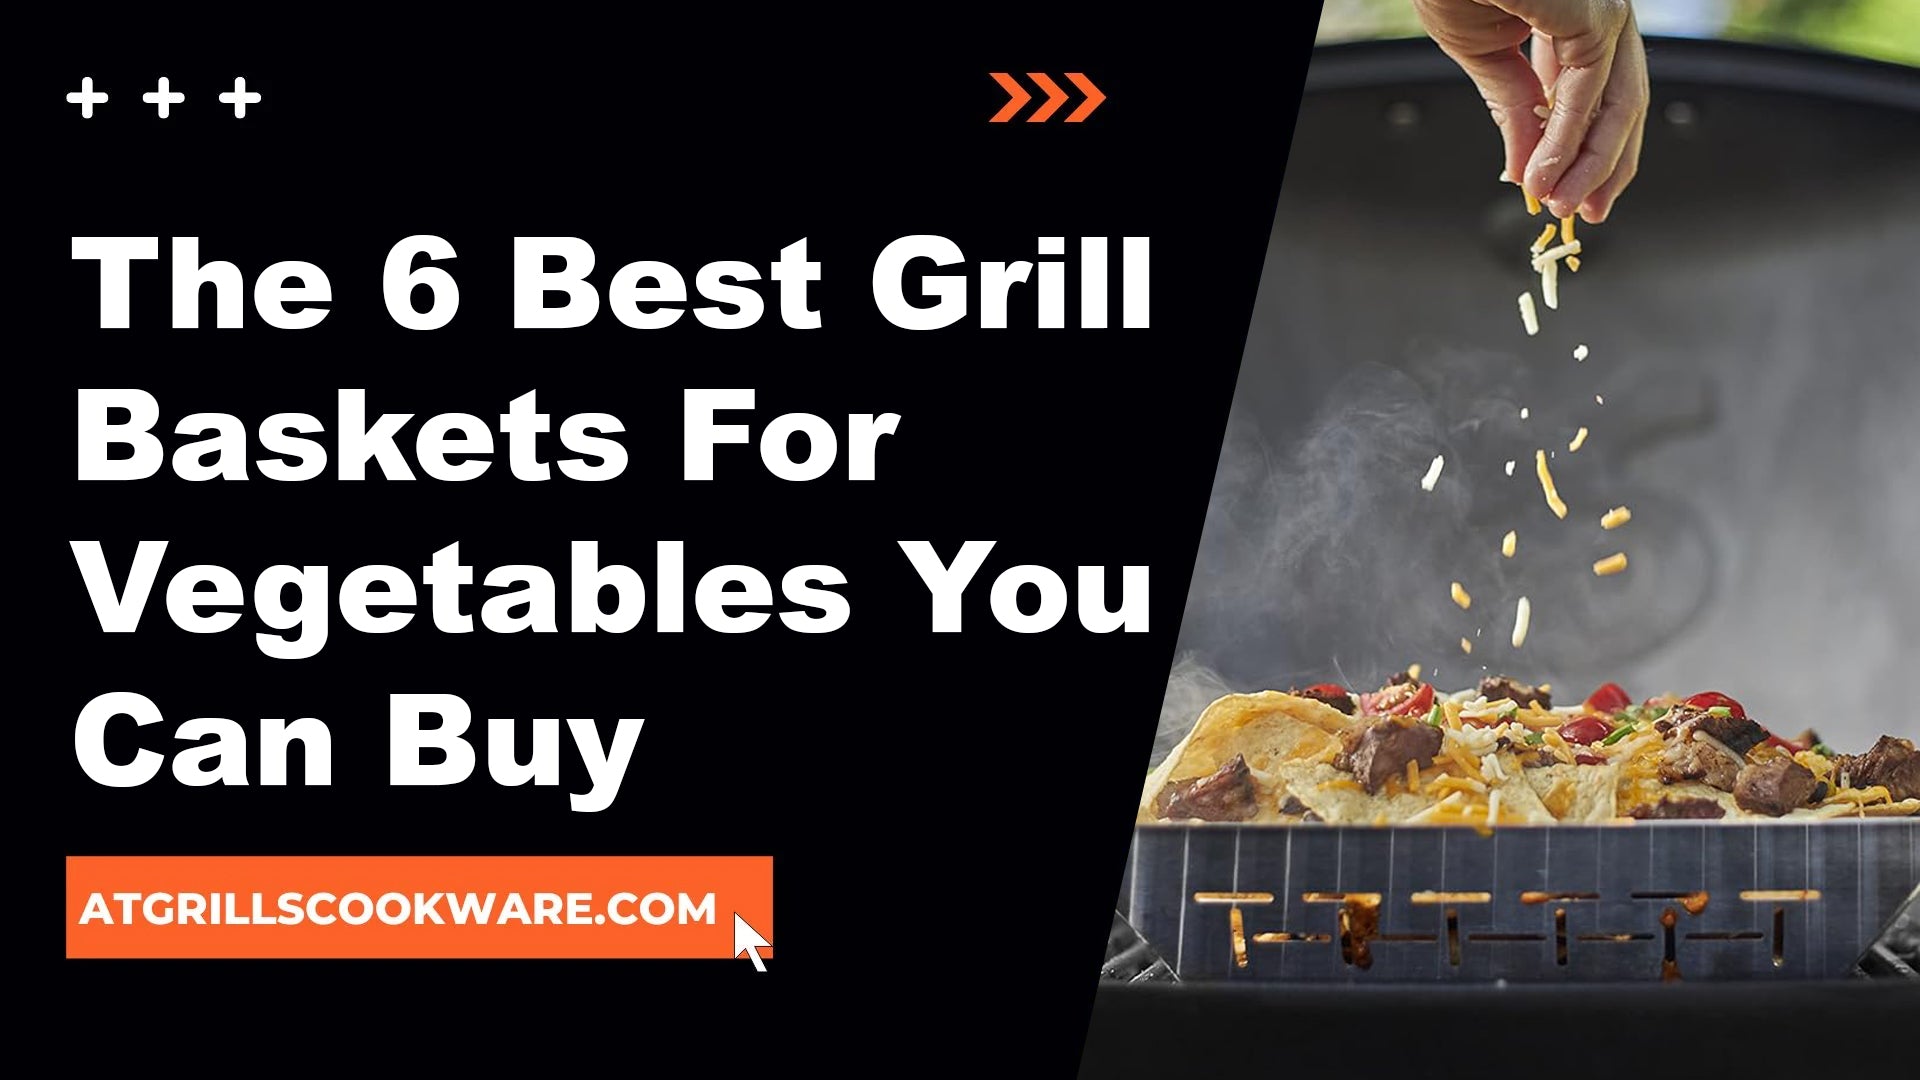 The 6 Best Grill Baskets For Vegetables You Can Buy